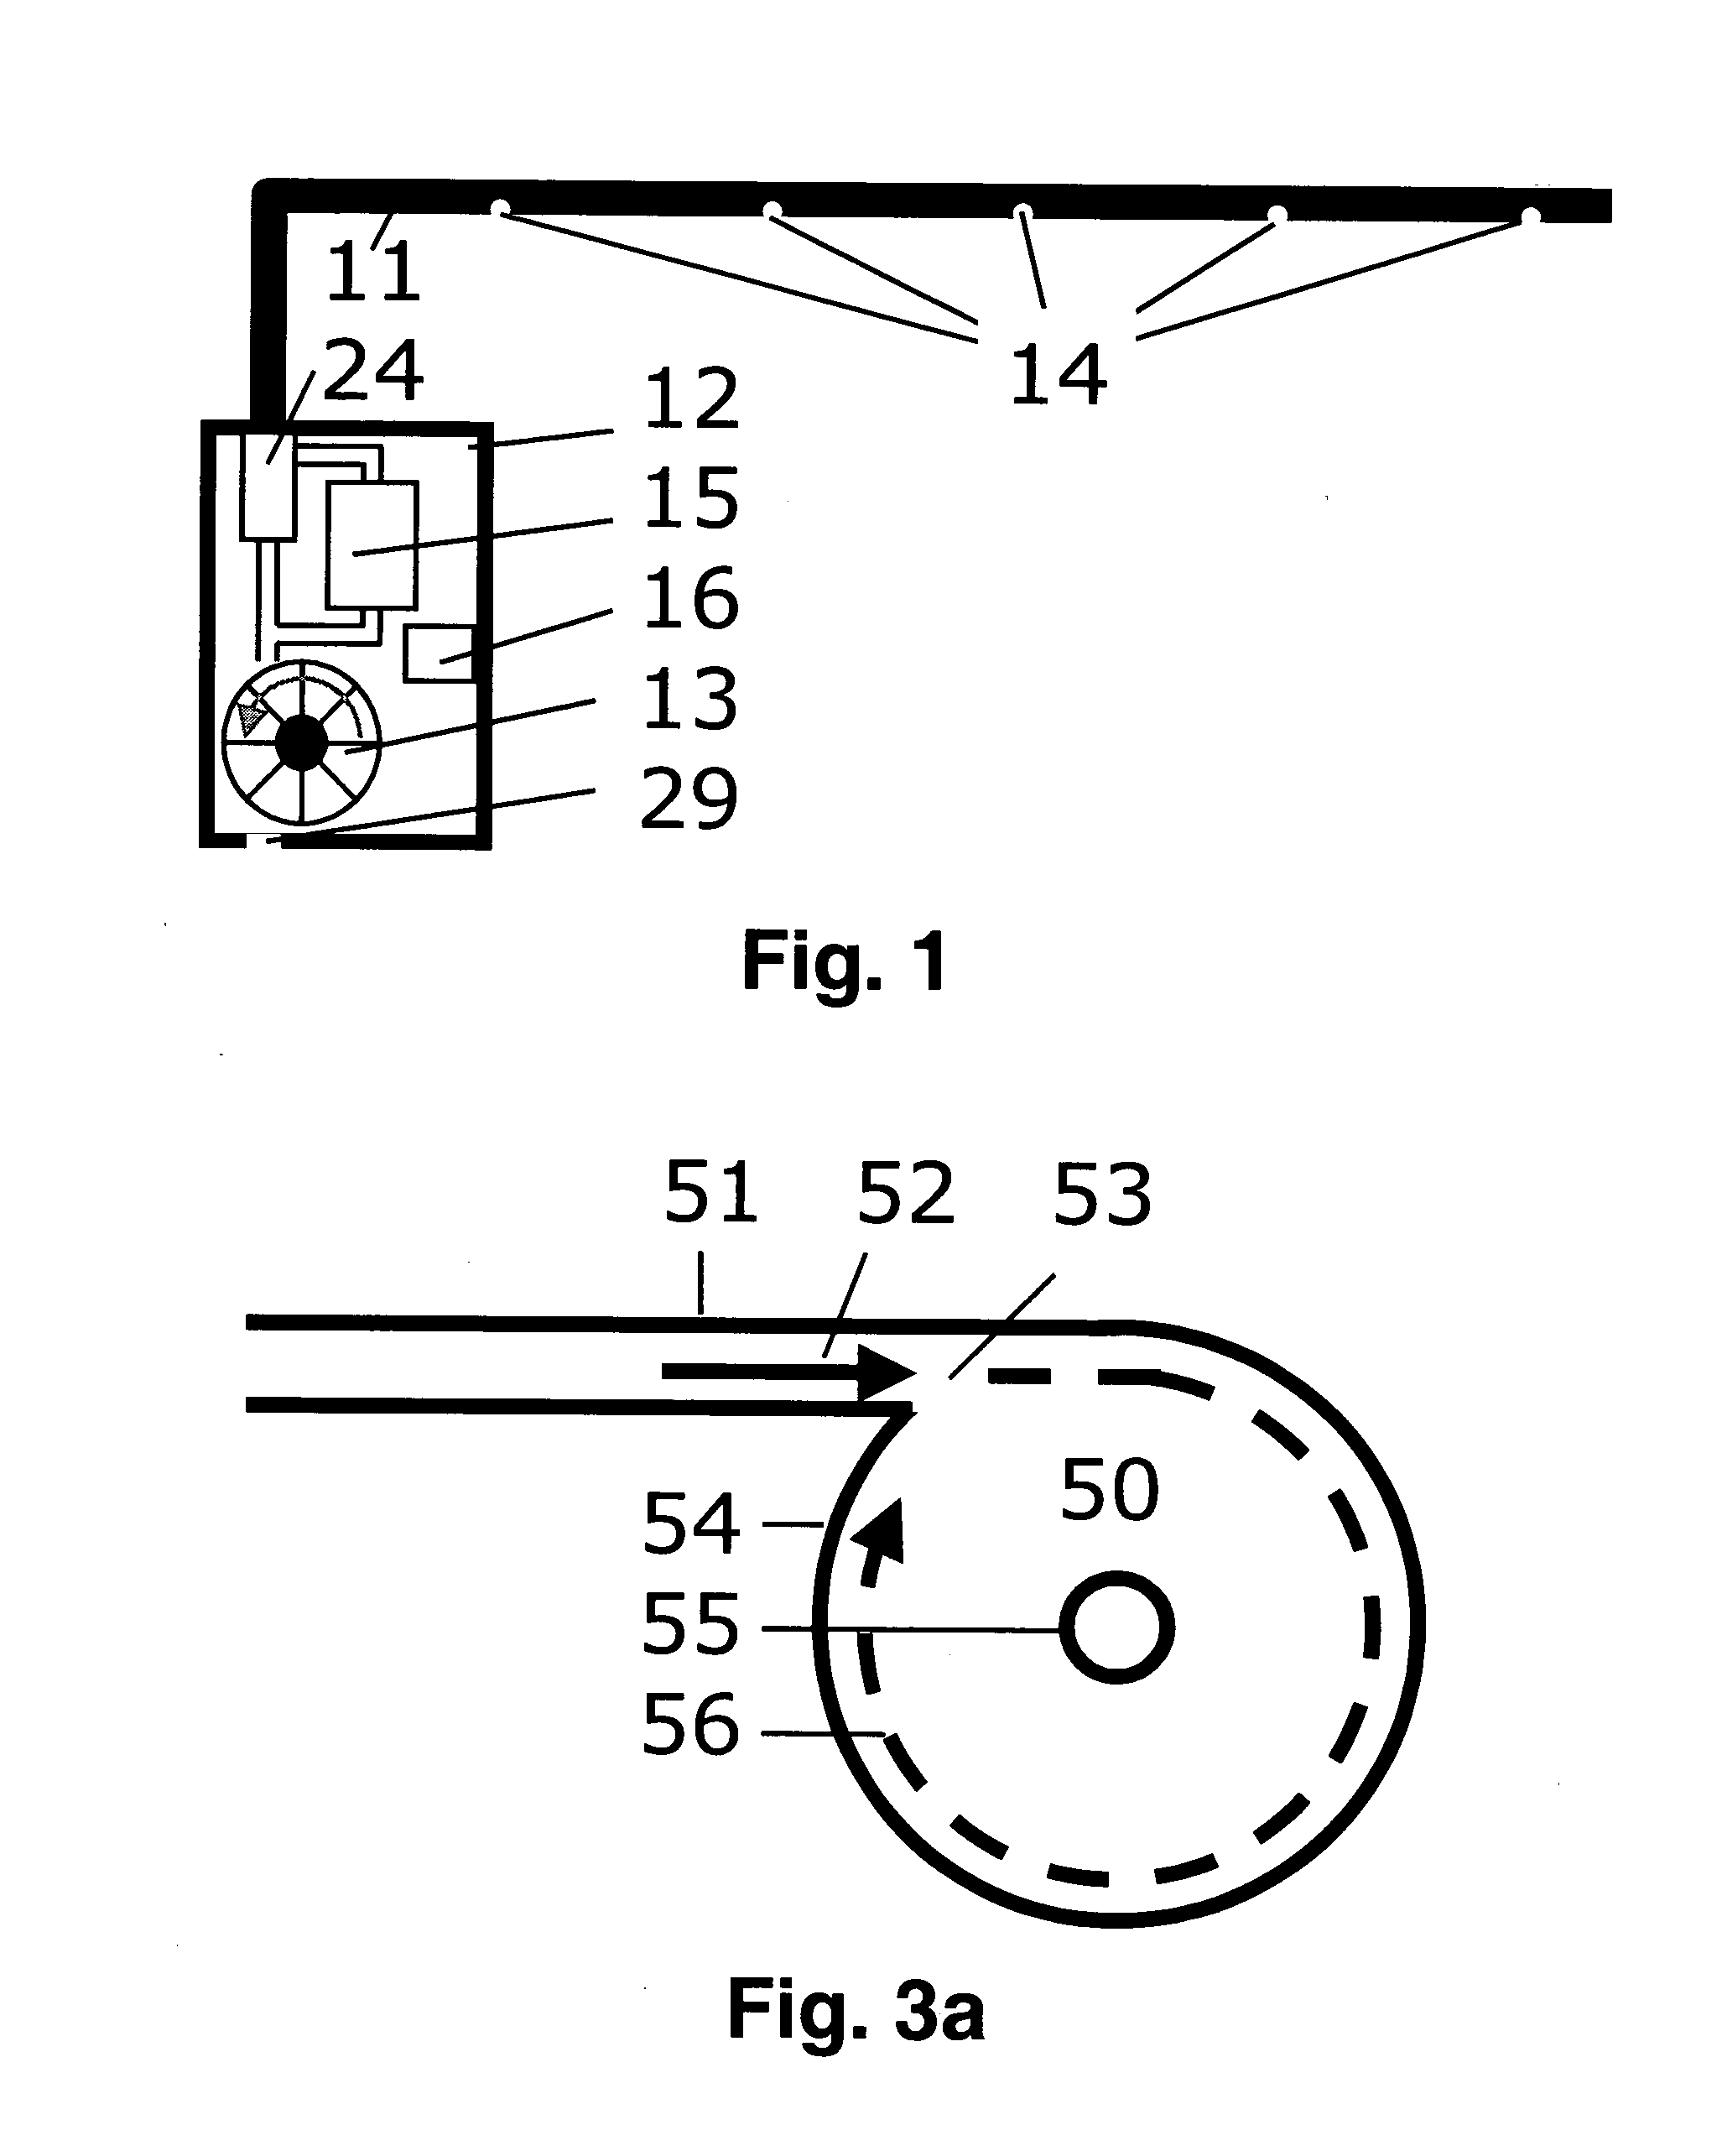 Analysis methods and devices for fluids